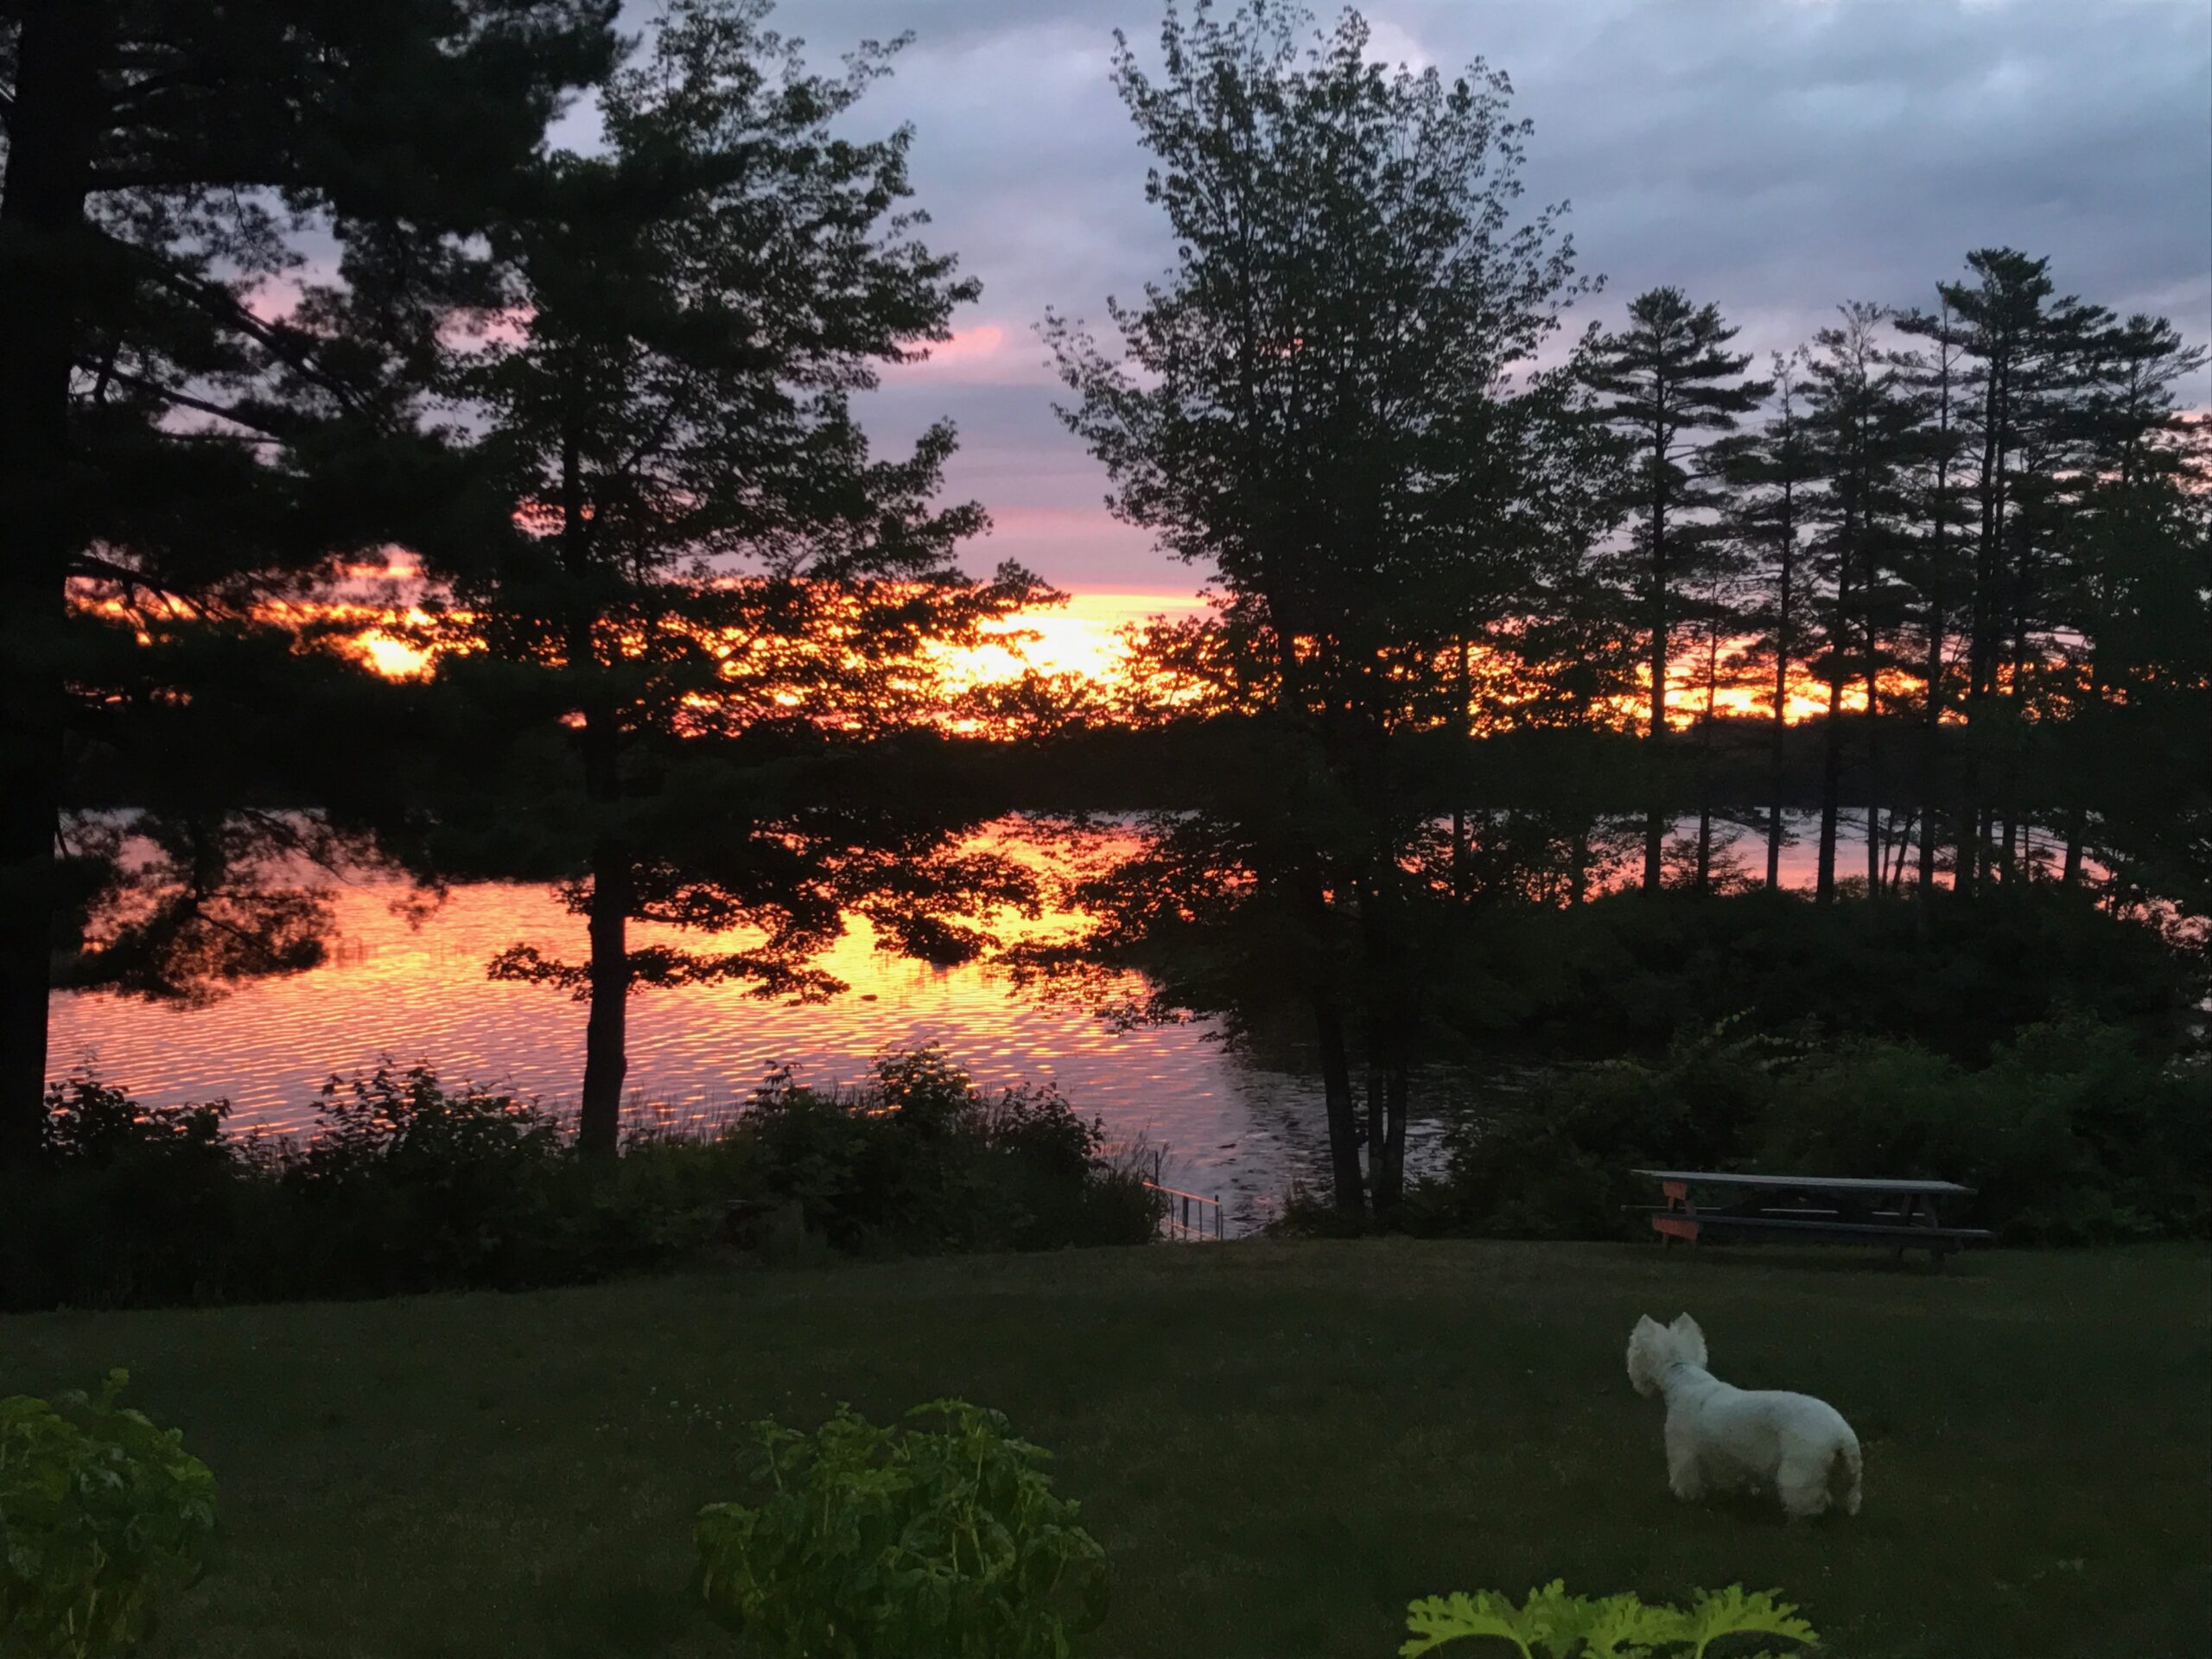 A small white dog watches a sunset over a lake